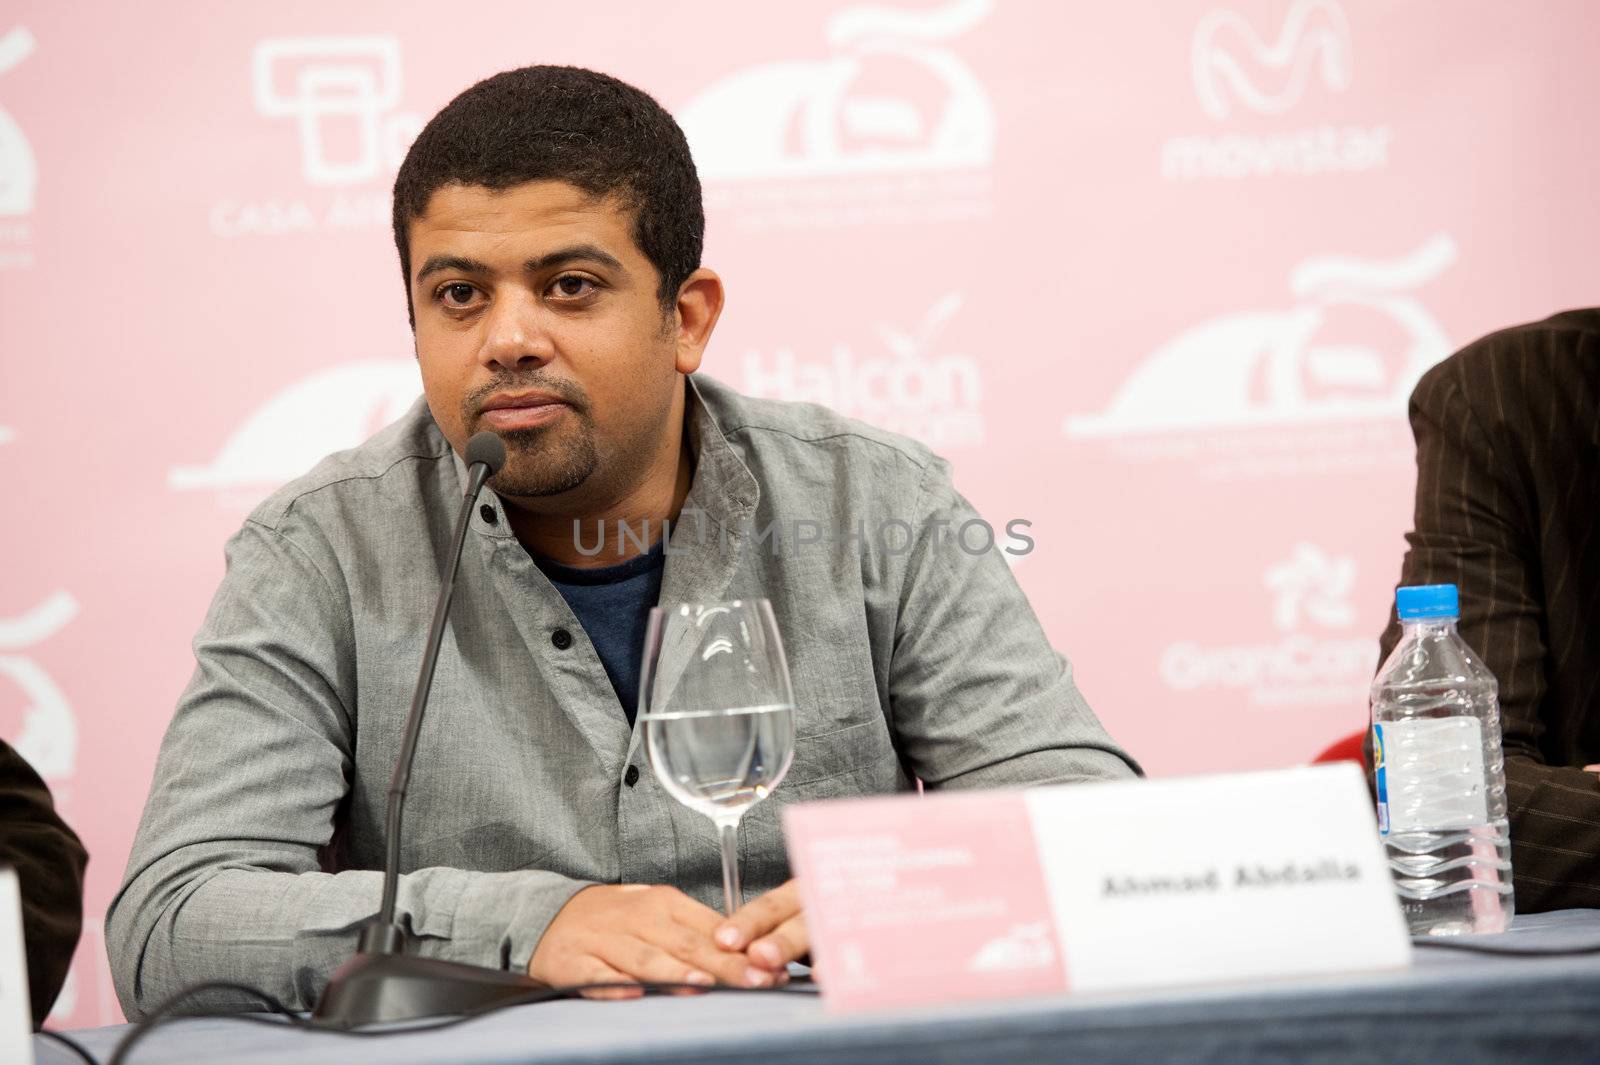 LAS PALMAS, SPAIN–MARCH 20: Ahmad Abdalla, from Cairo, film director of Microphone (2010), during LPA International Film Festival on March 20, 2012 in Las Palmas, Spain
